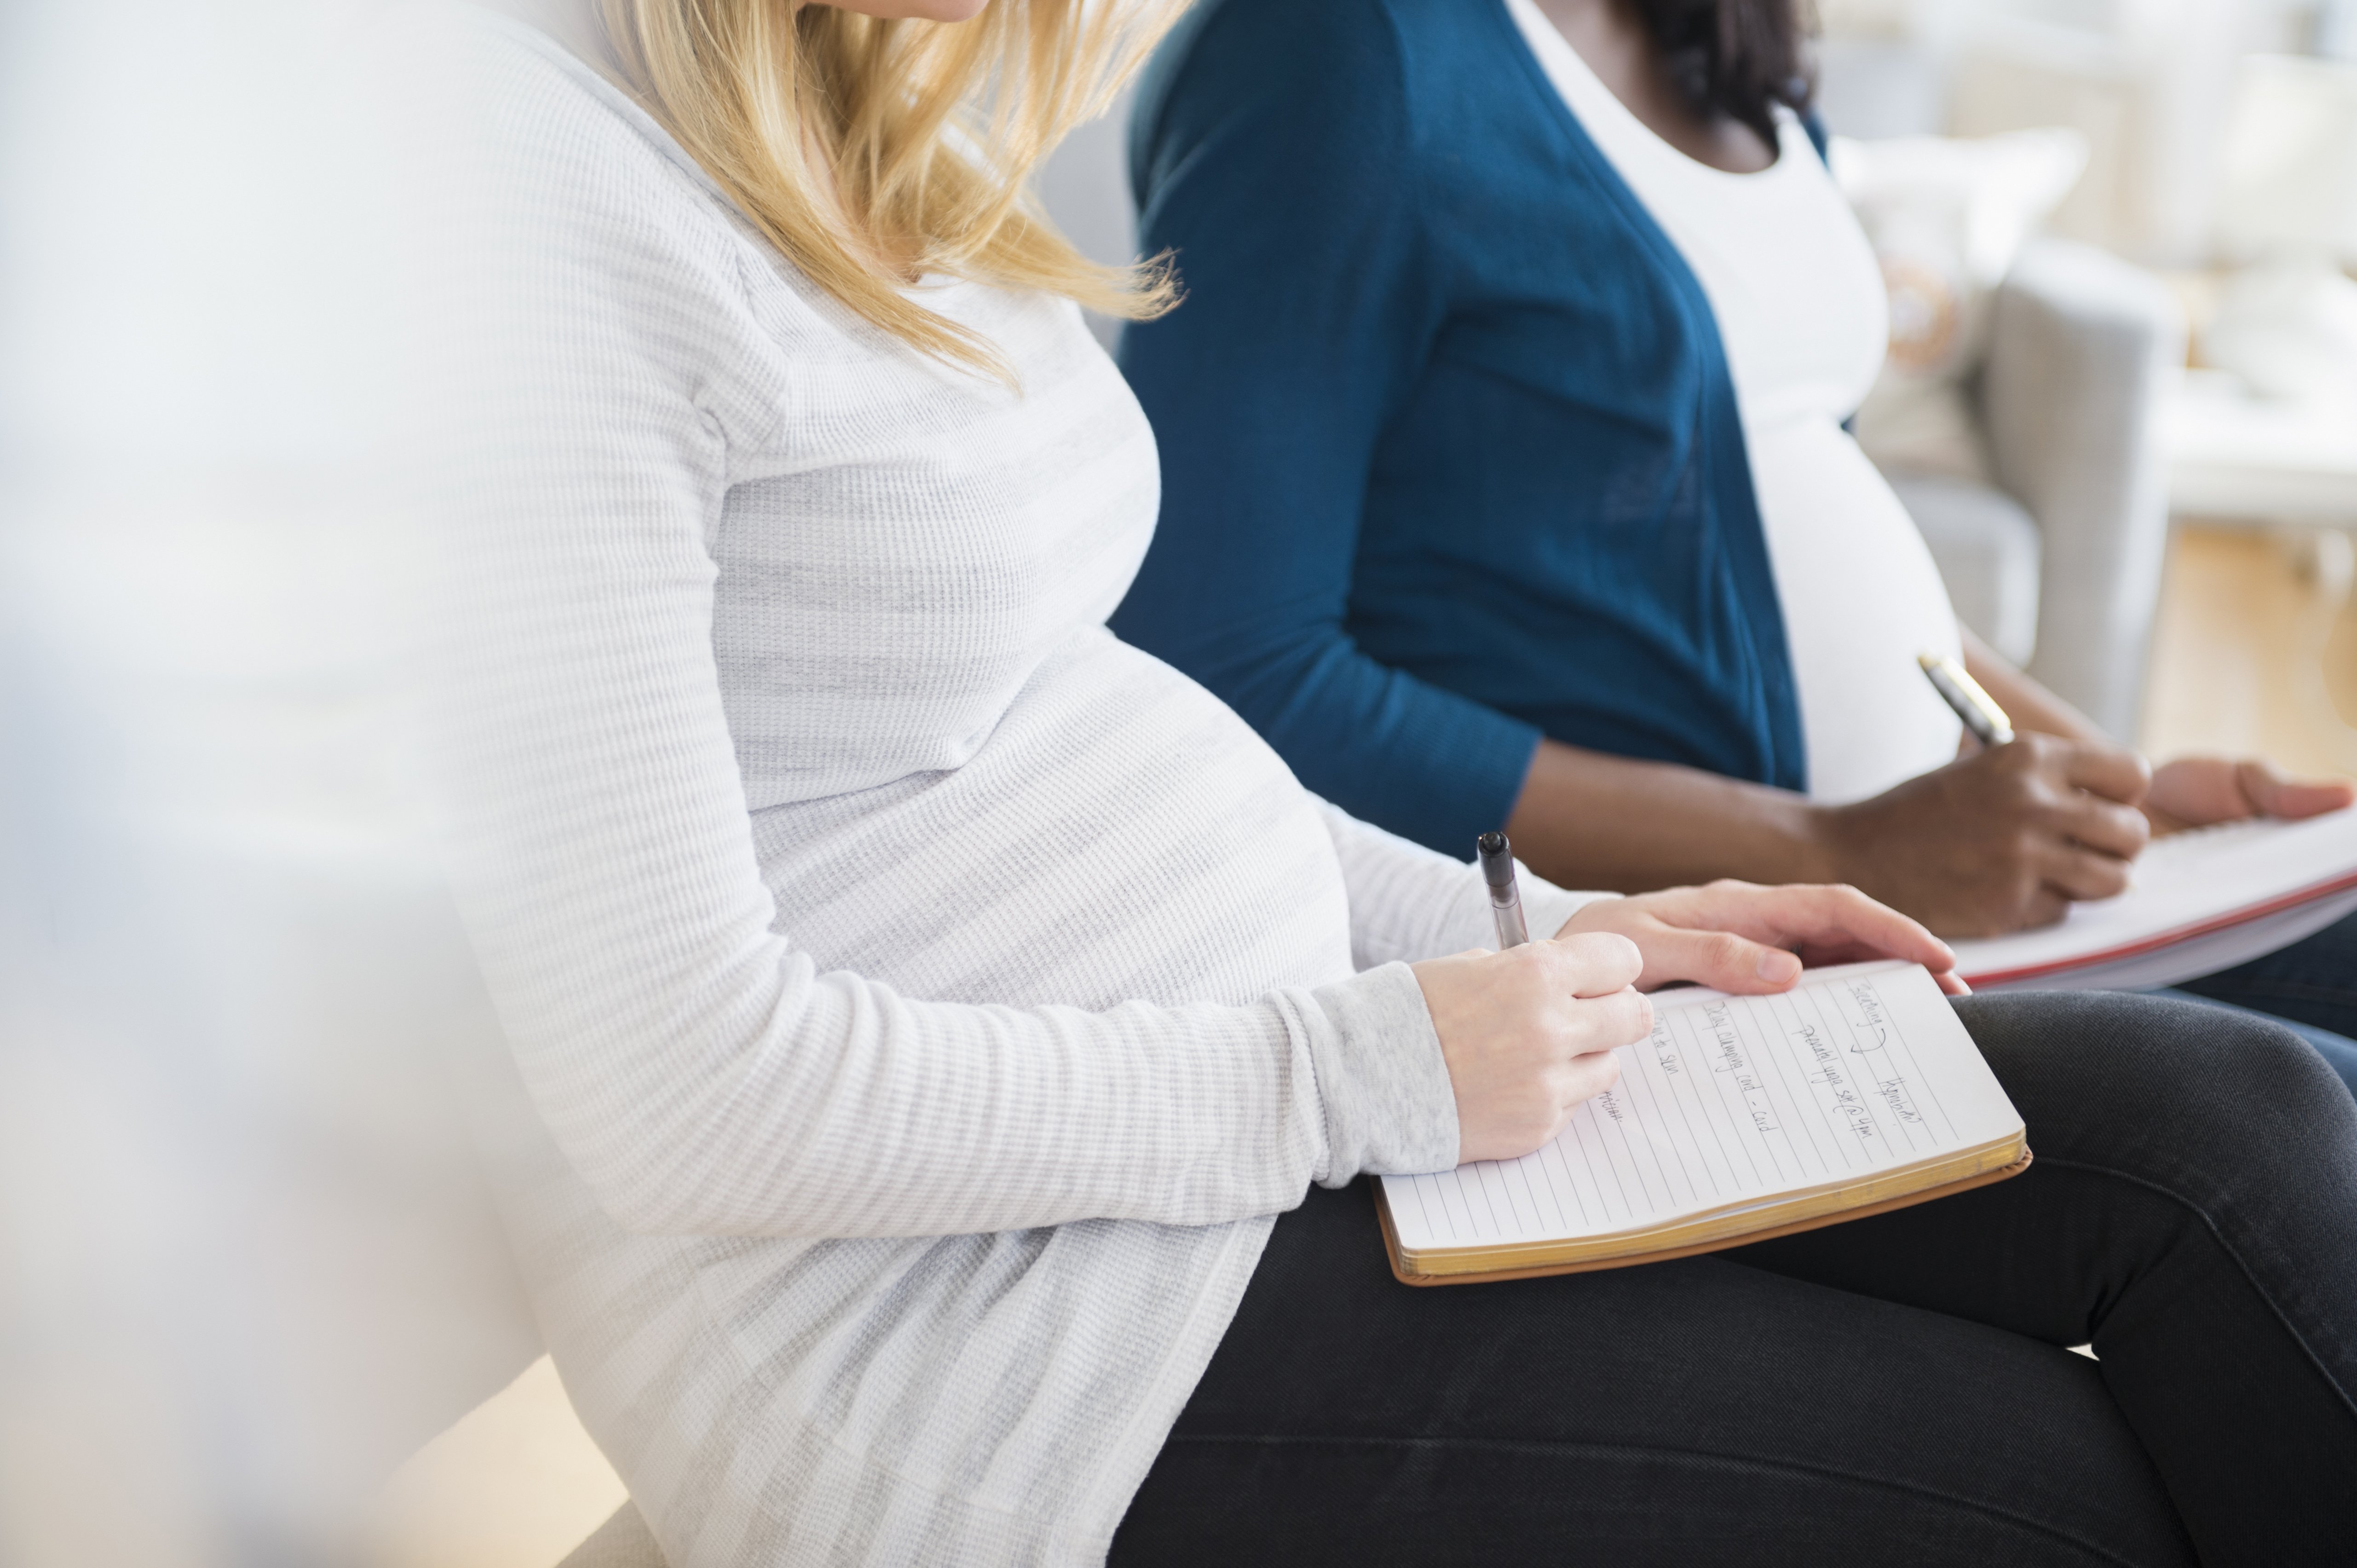 Pregnant women taking notes in class | Photo: Getty images